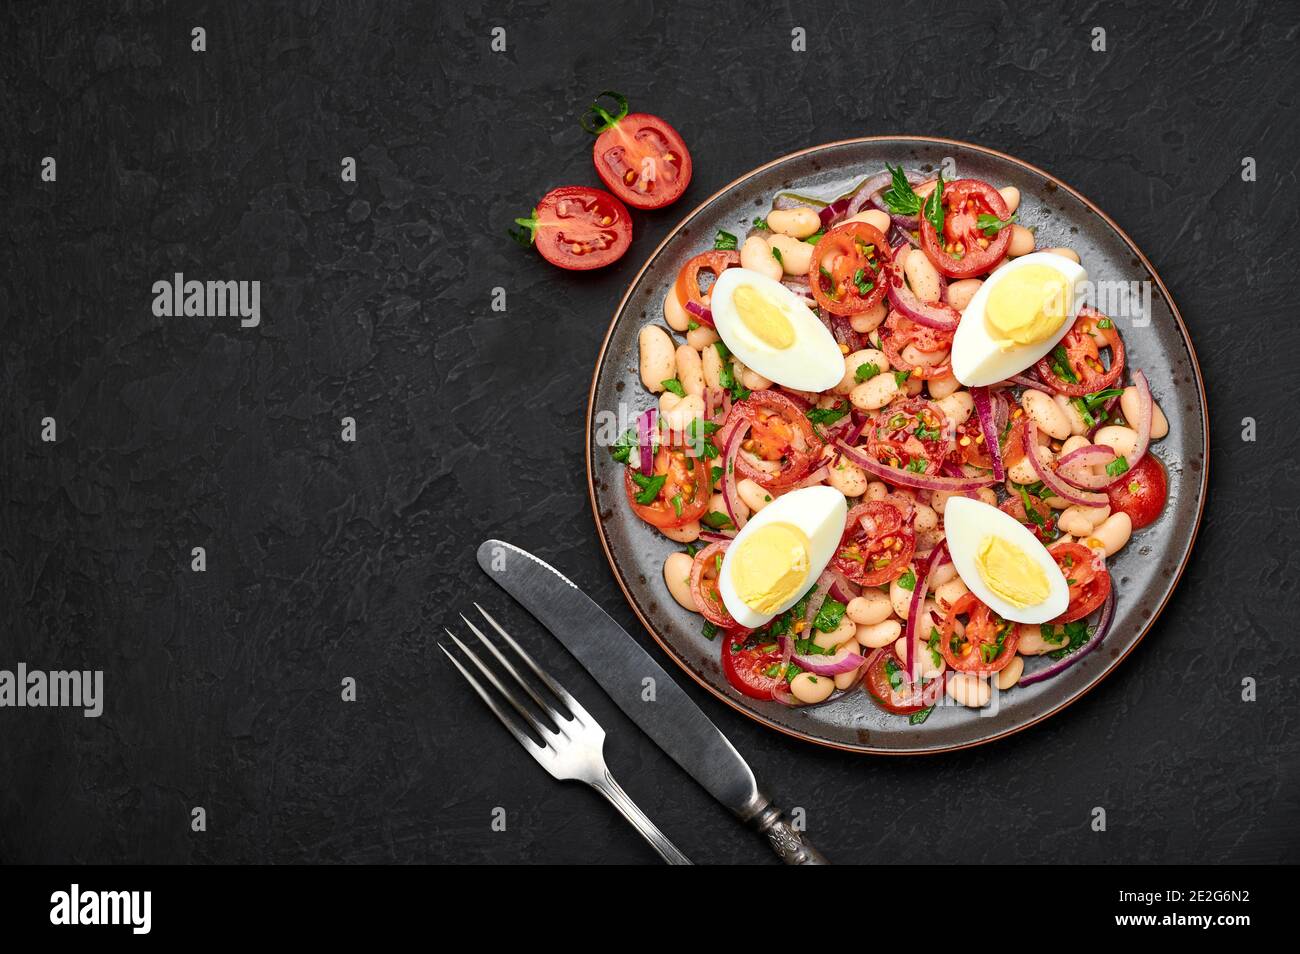 A Piyaz salad on black plate on dark slate table top. Turkish cuisine vegetarian dish. Middle eastern cuisine food. Top view. Copy space Stock Photo